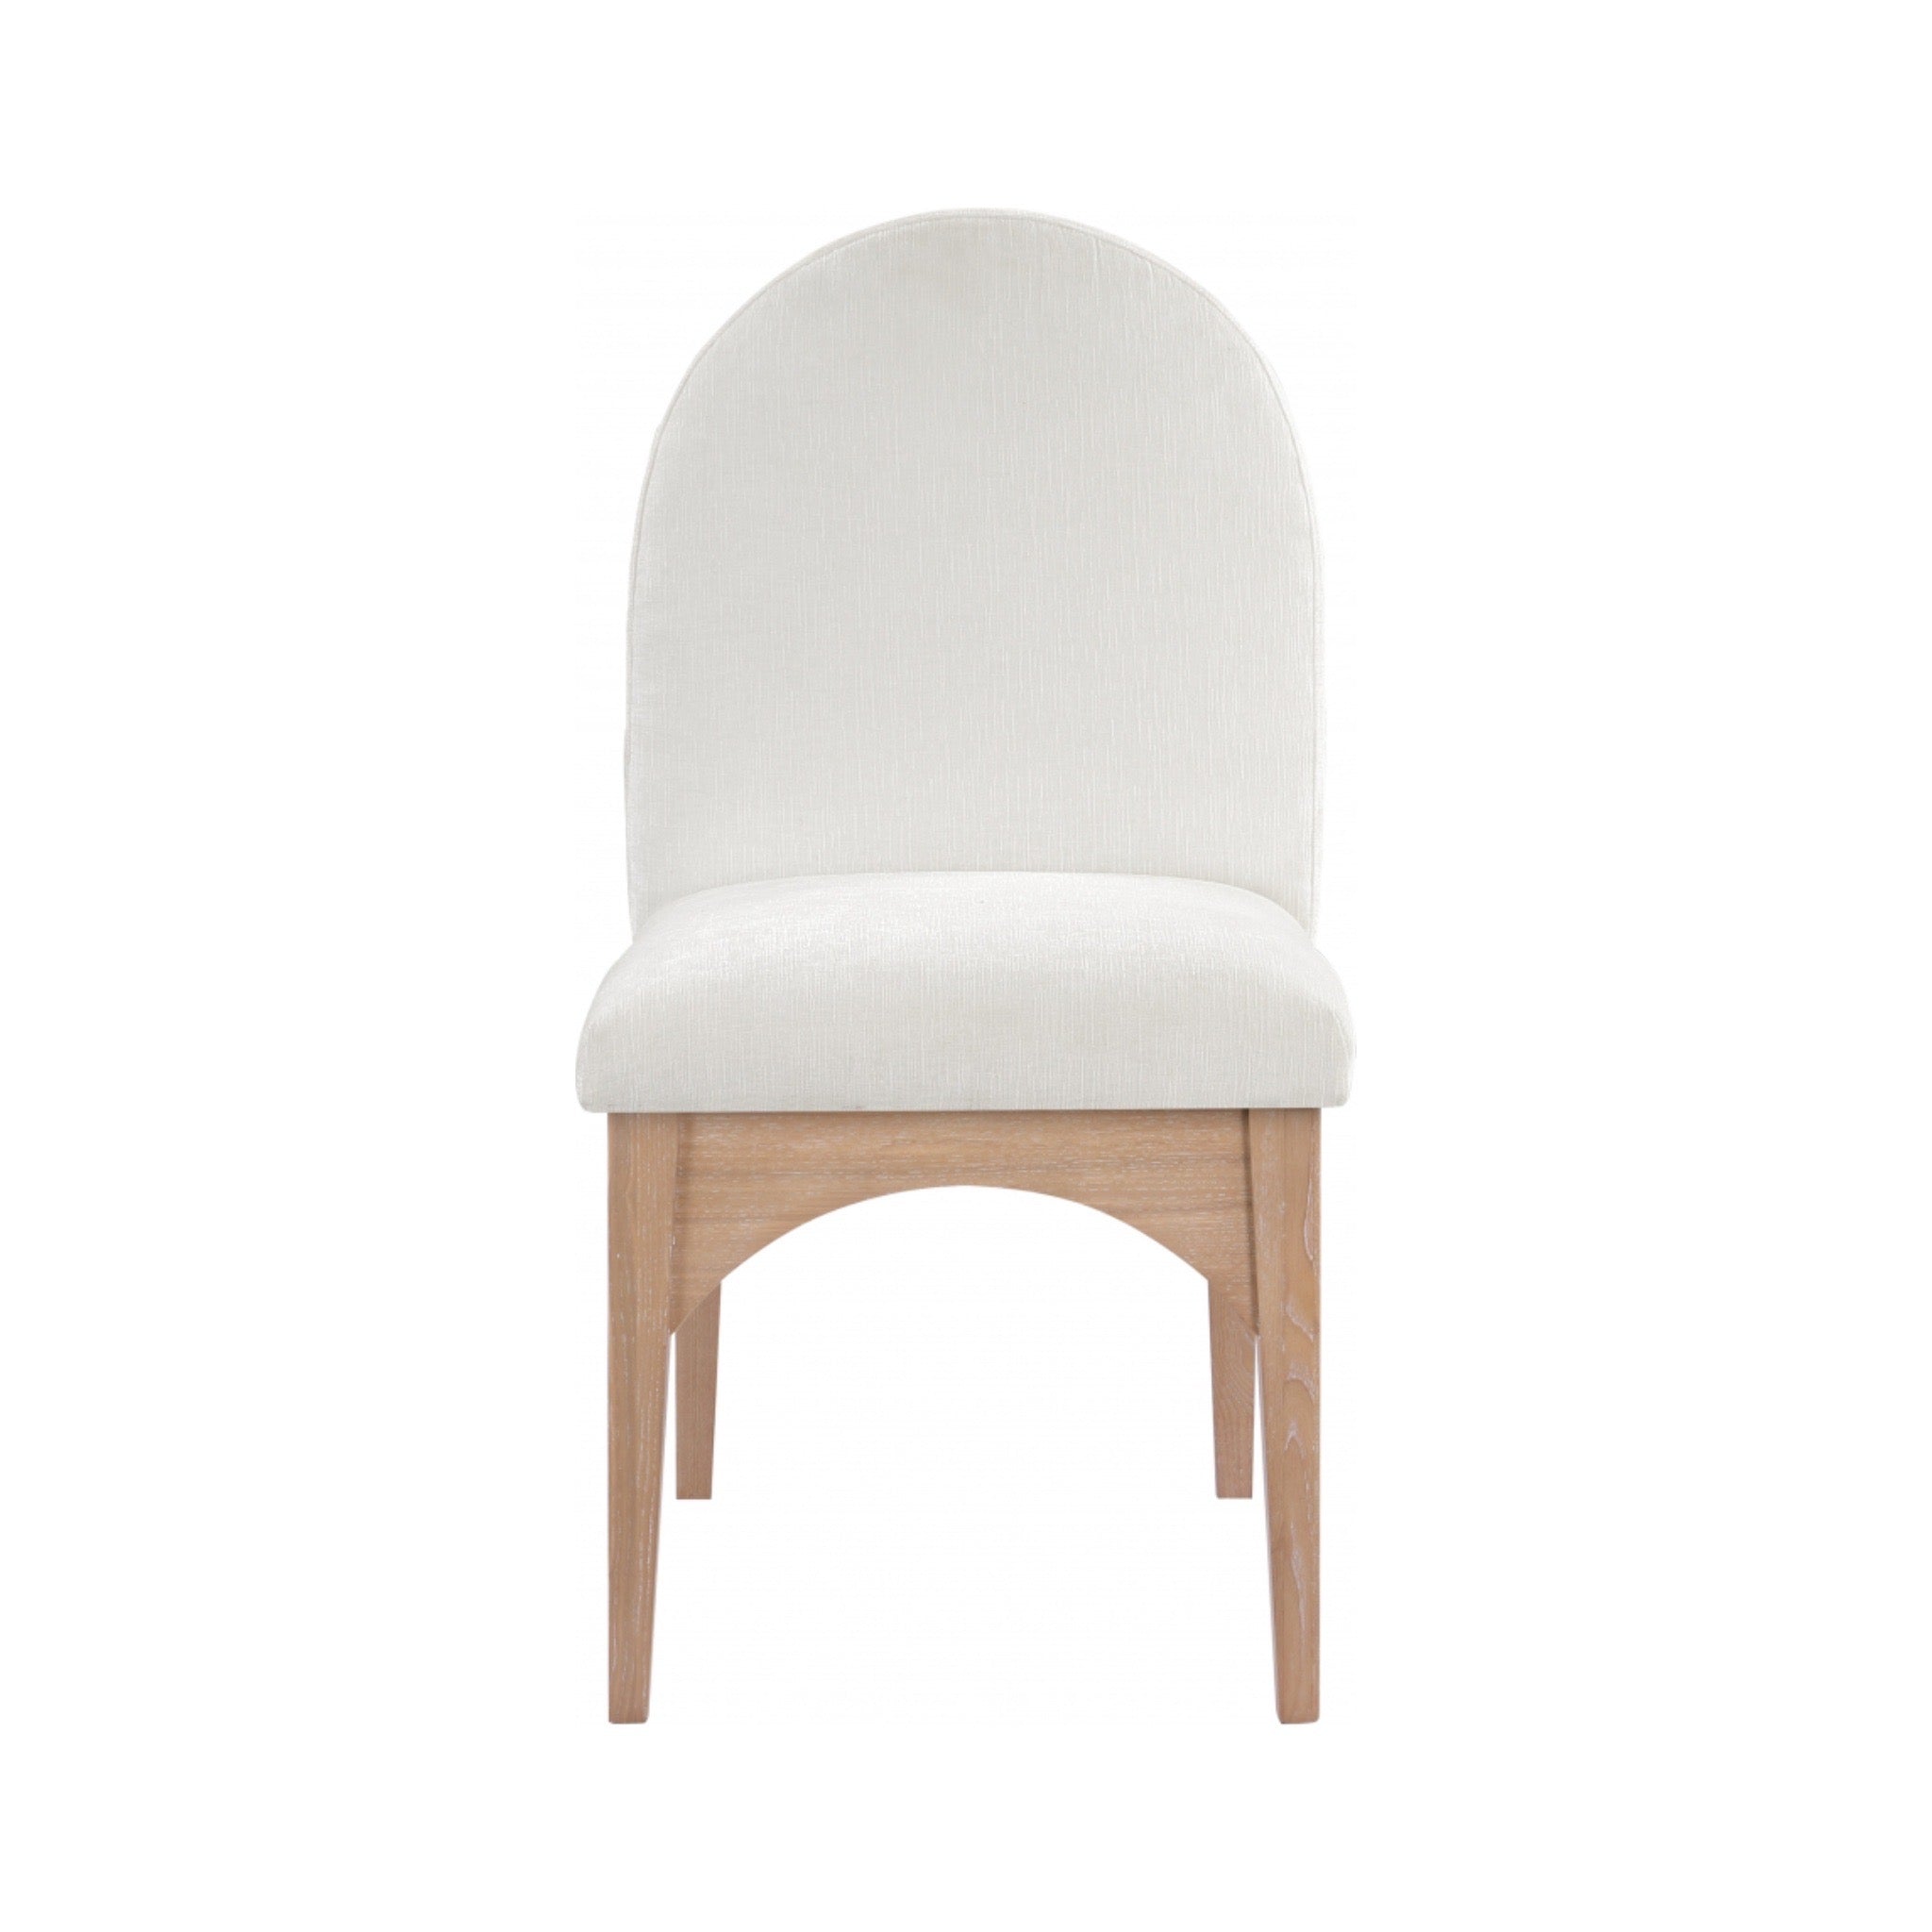 Astoria Chenille Fabric Dining Side Chair - Cream Natural Ash